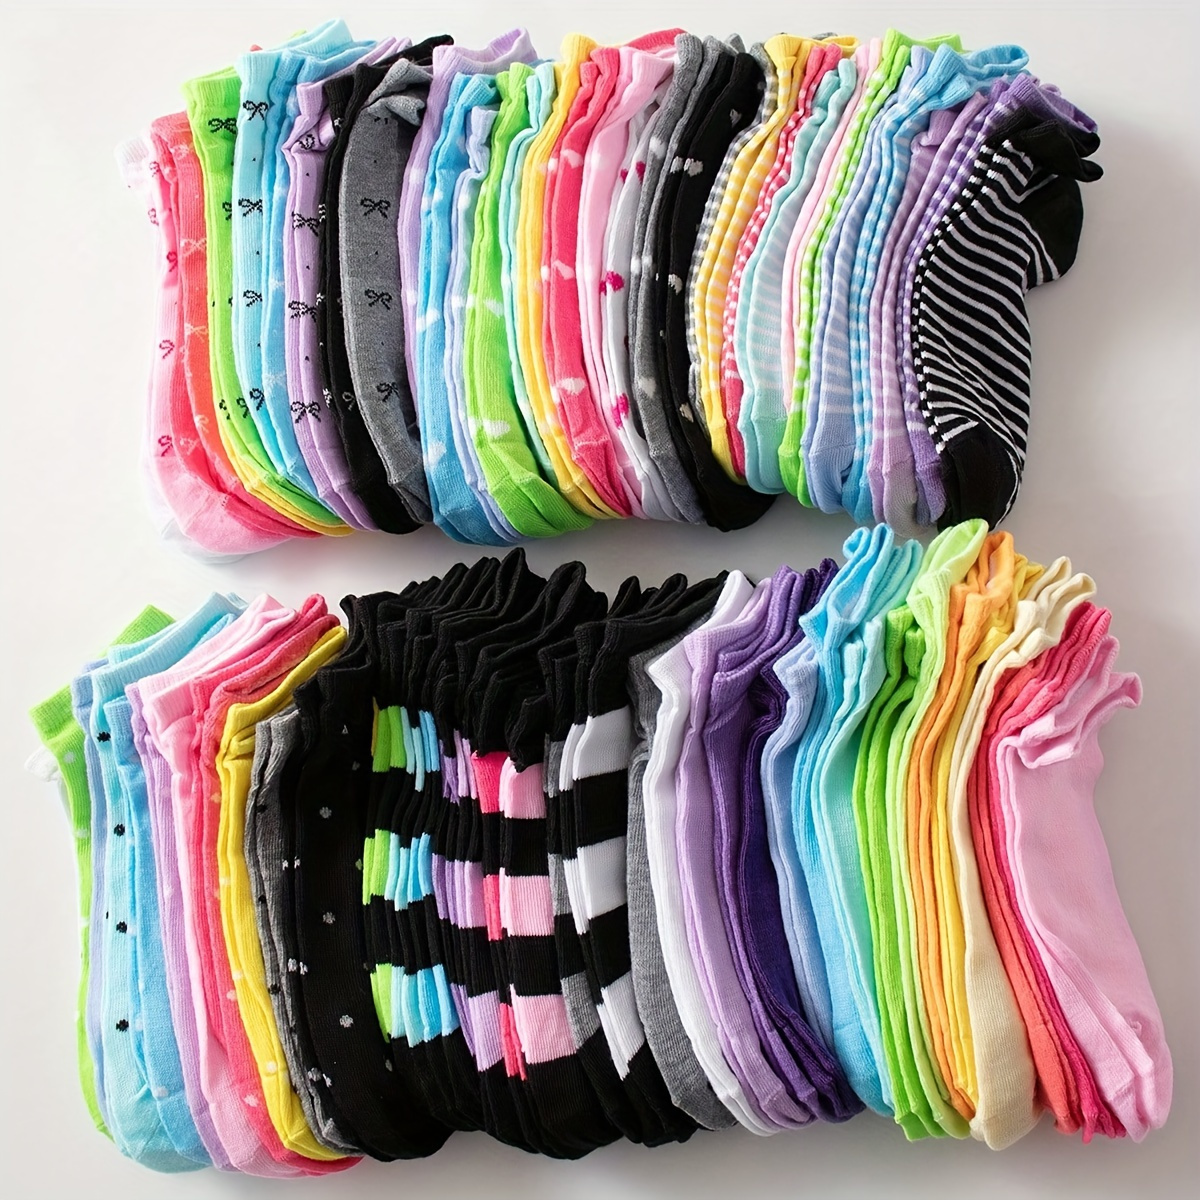 

20 Pairs Candy Colored Socks, Comfy & Breathable Low Cut Ankle Socks, Women's Stockings & Hosiery